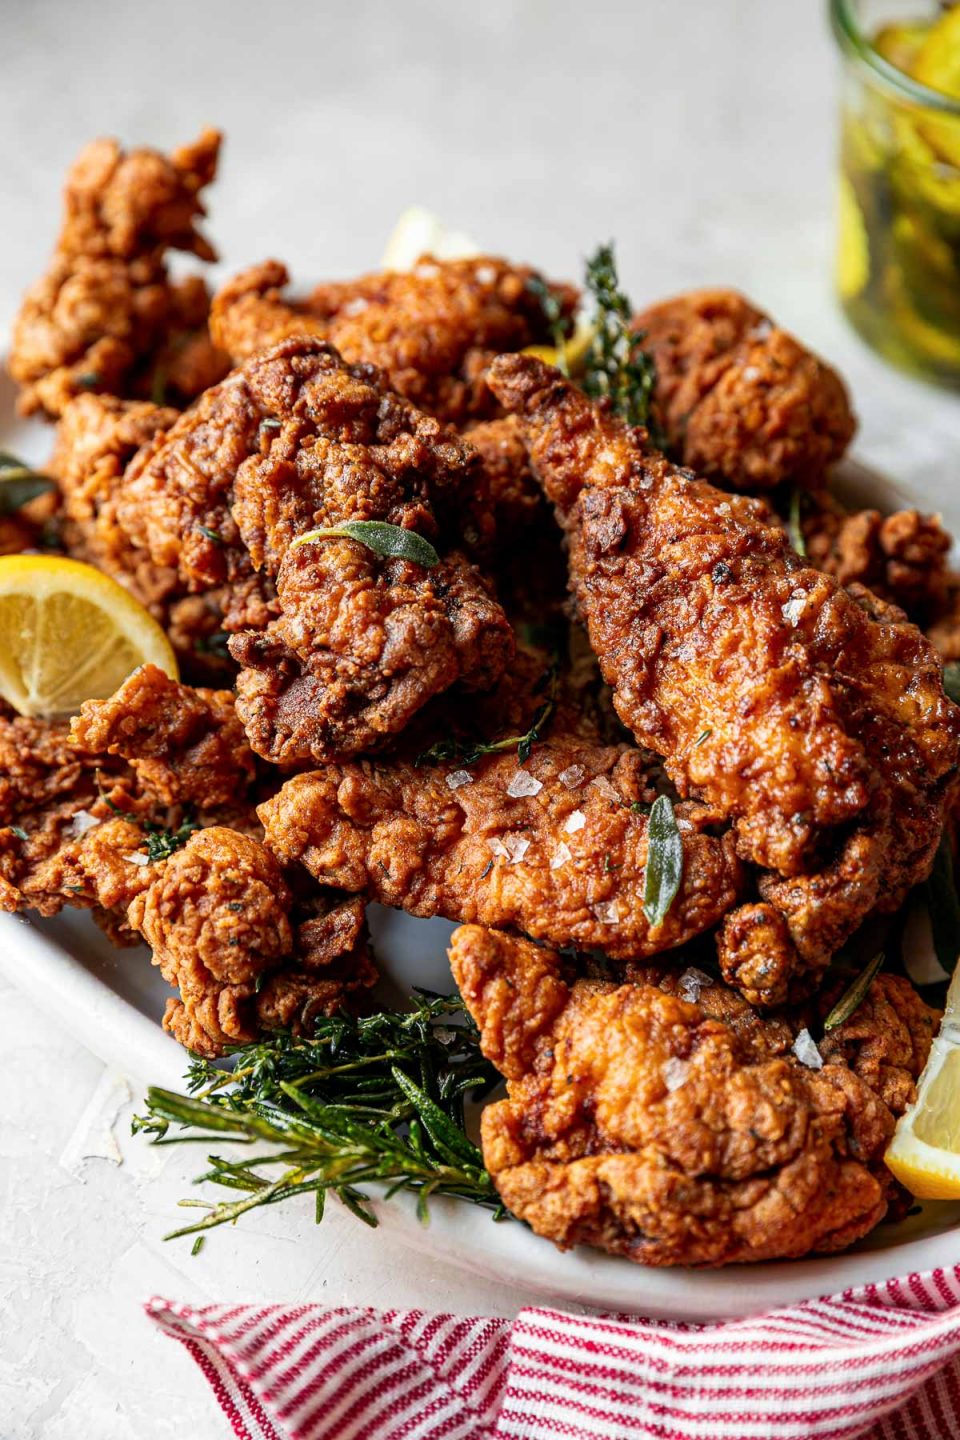 An angled shot of crispy, golden brown fried chicken is piled high on a white oval platter. Sprigs of herbs and slices of lemon are intertwined with the chicken. The platter sits on a white textured surface with a red & white striped linen napkin is tucked in front of the platter and a jar of pickles sit behind the platter.